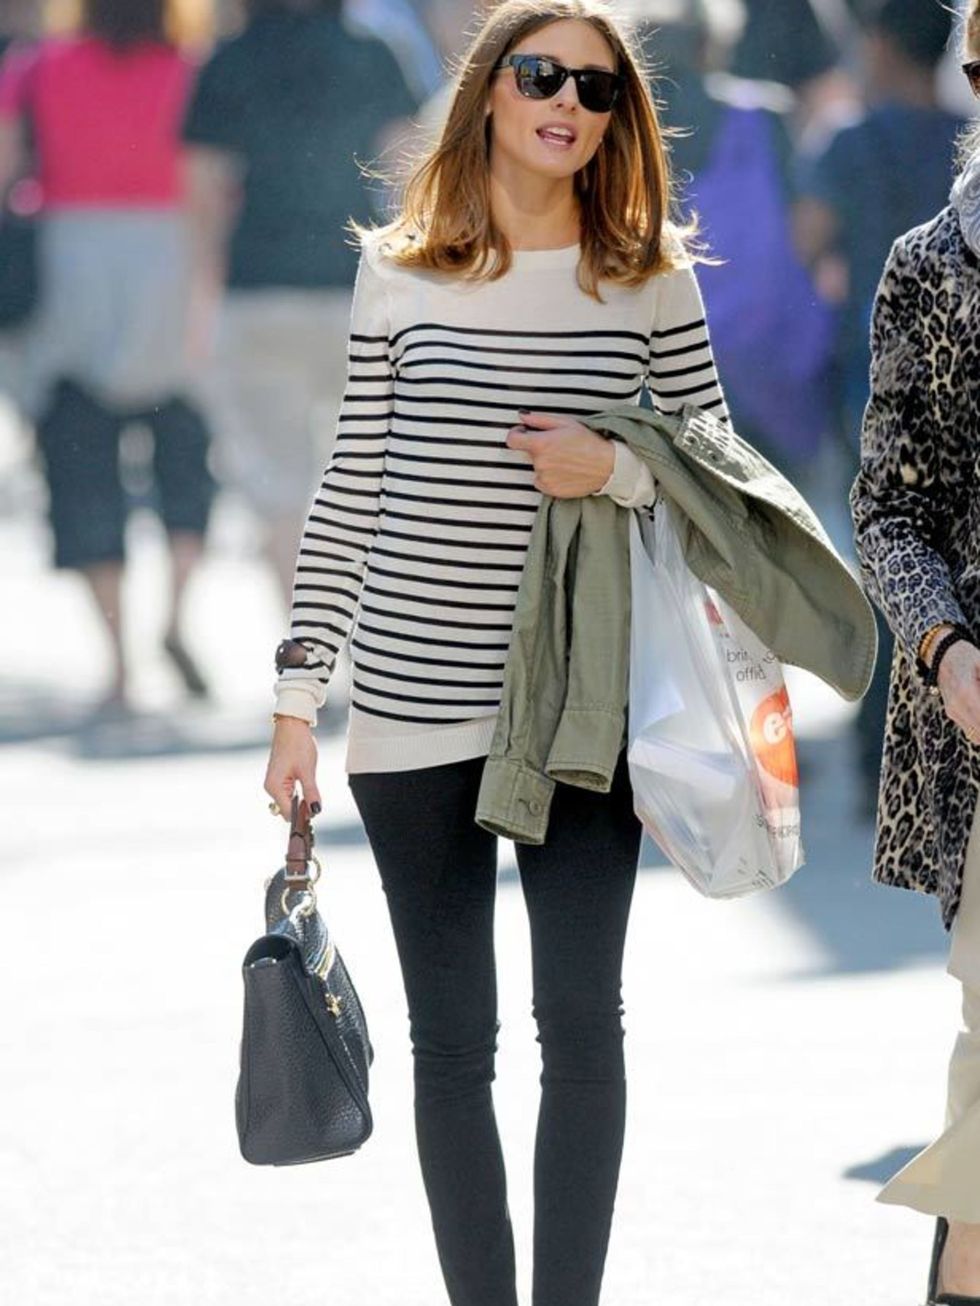 <p><a href="http://www.elleuk.com/starstyle/style-files/(section)/olivia-palermo">Olivia Palermo</a> teaming a chic breton sweater with a 'Polly' <a href="http://www.elleuk.com/catwalk/collections/mulberry/">Mulberry</a> bag</p>